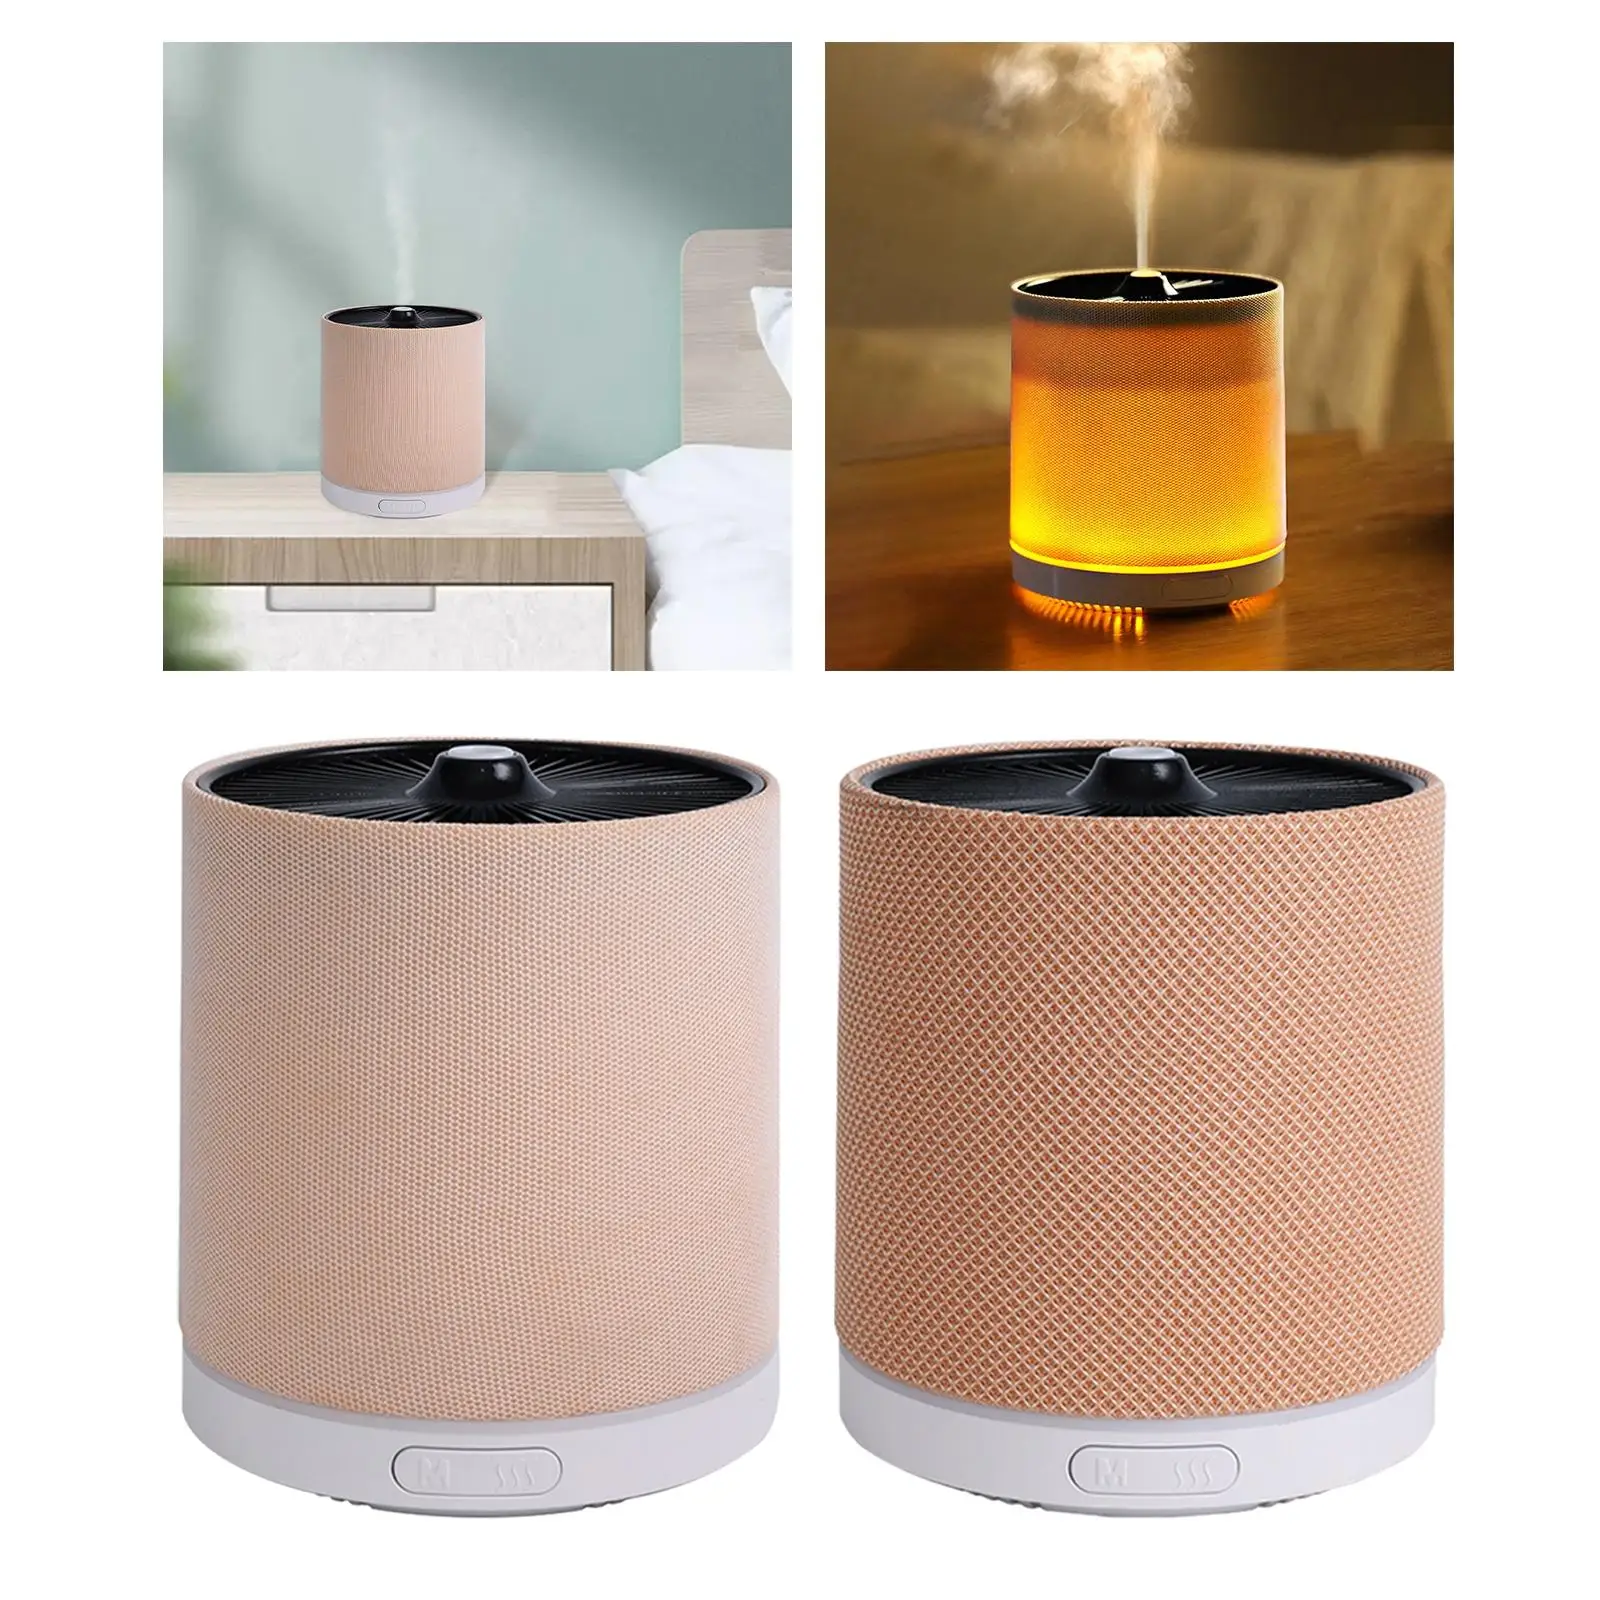 Portable Essential Oil Aroma Diffuser Humidifier USB Charging for Desktop Bedroom